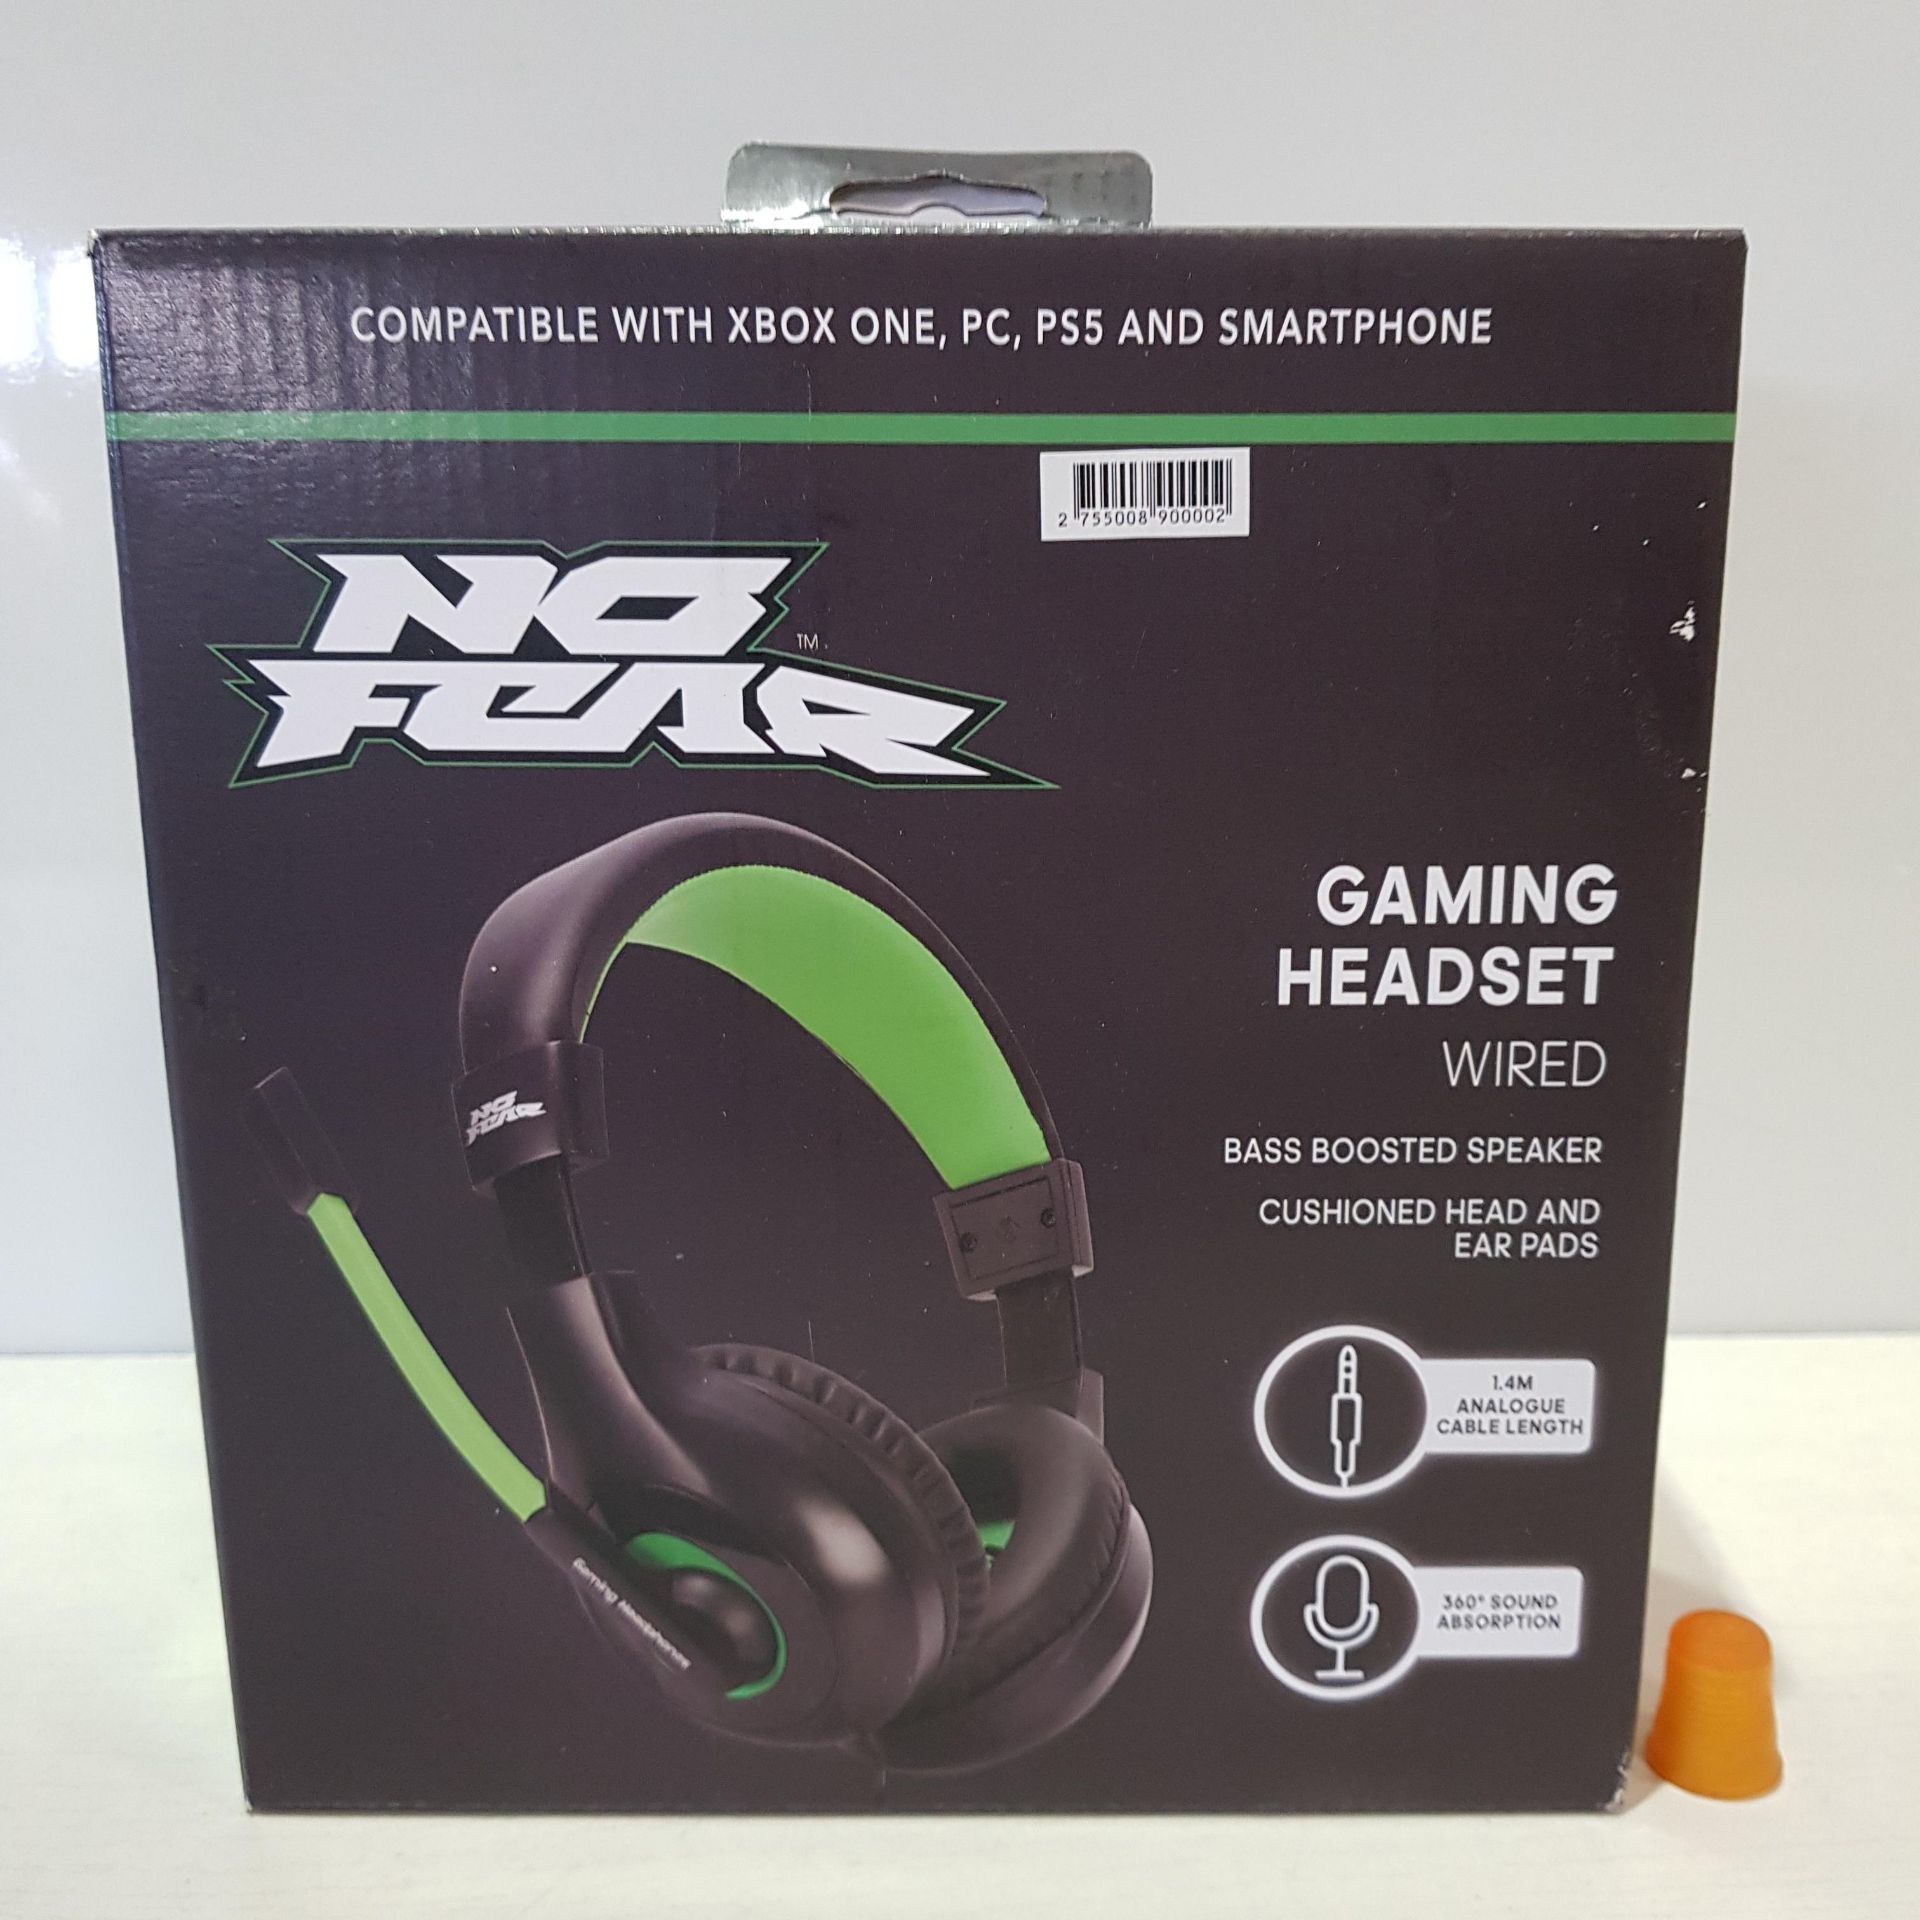 18 X NO FEAR GAMING HEADSET WIRED WITH BASS BOOSTED SPEAKER, CUSHIONED HEAD AND EAR PADS. 1.4M